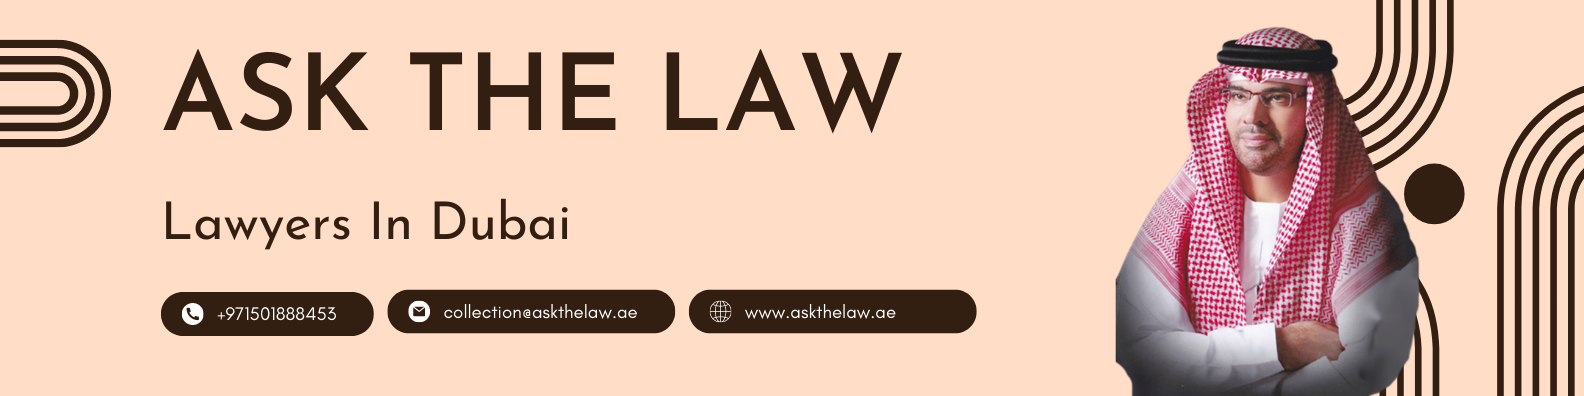 Dubai Lawyers - ASK THE LAW cover